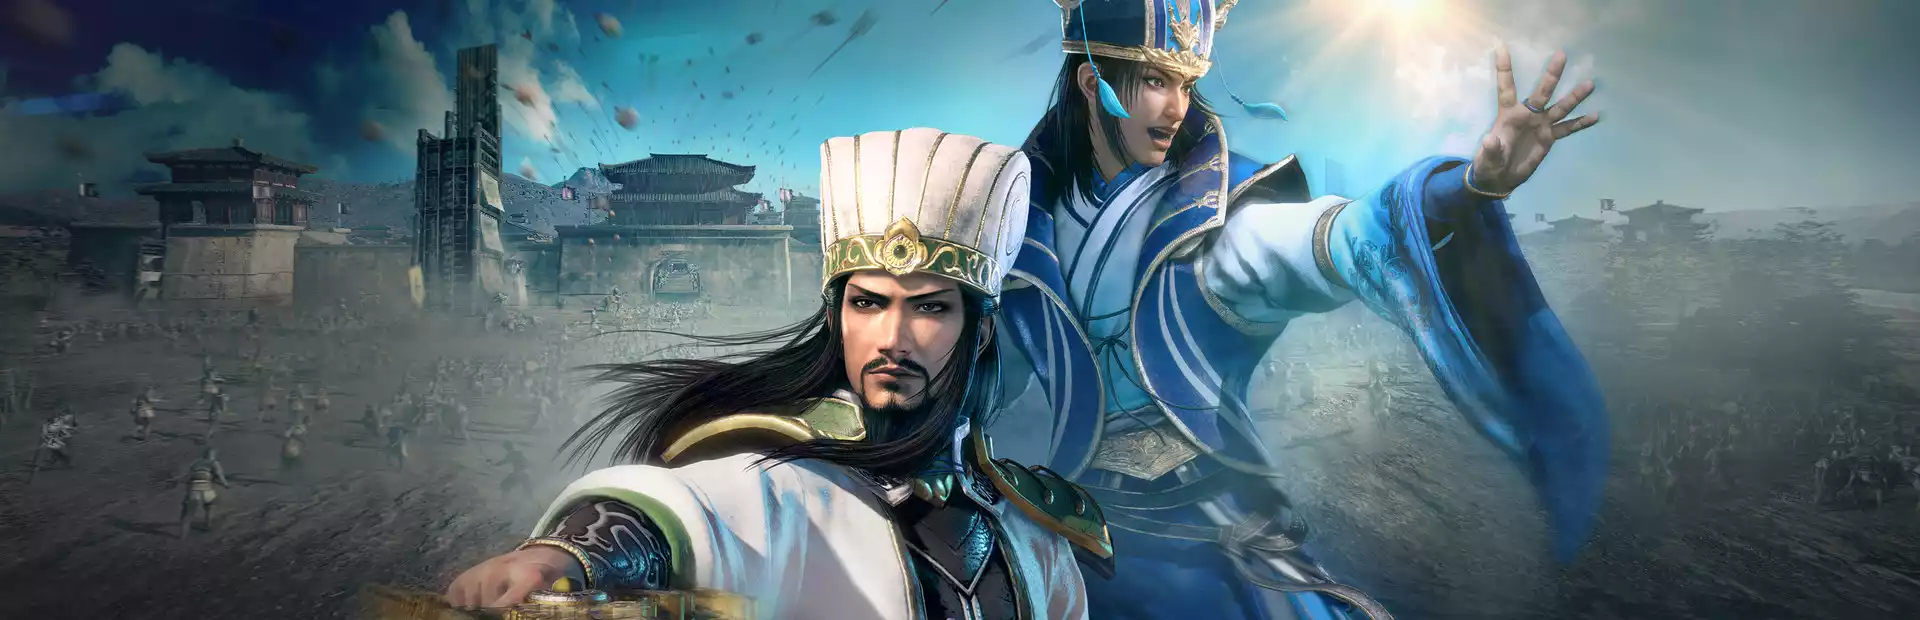 DYNASTY WARRIORS 9 Empires Deluxe Edition Steam Key China